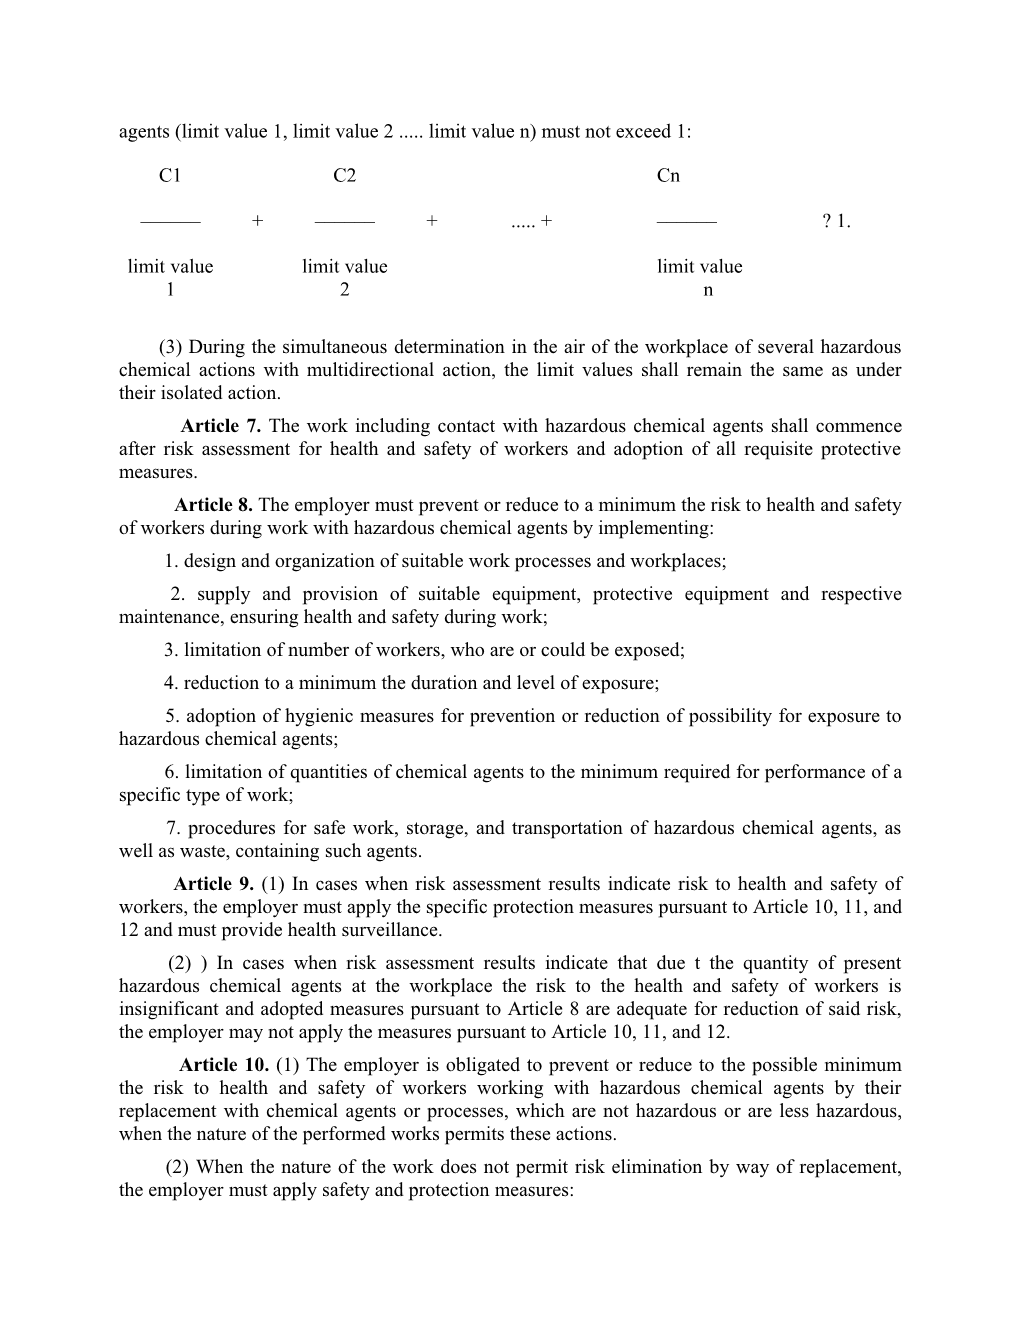 Ordinance No 13 Dated 30.12.2003 on Protection of Workers from the Risks Related to Chemical